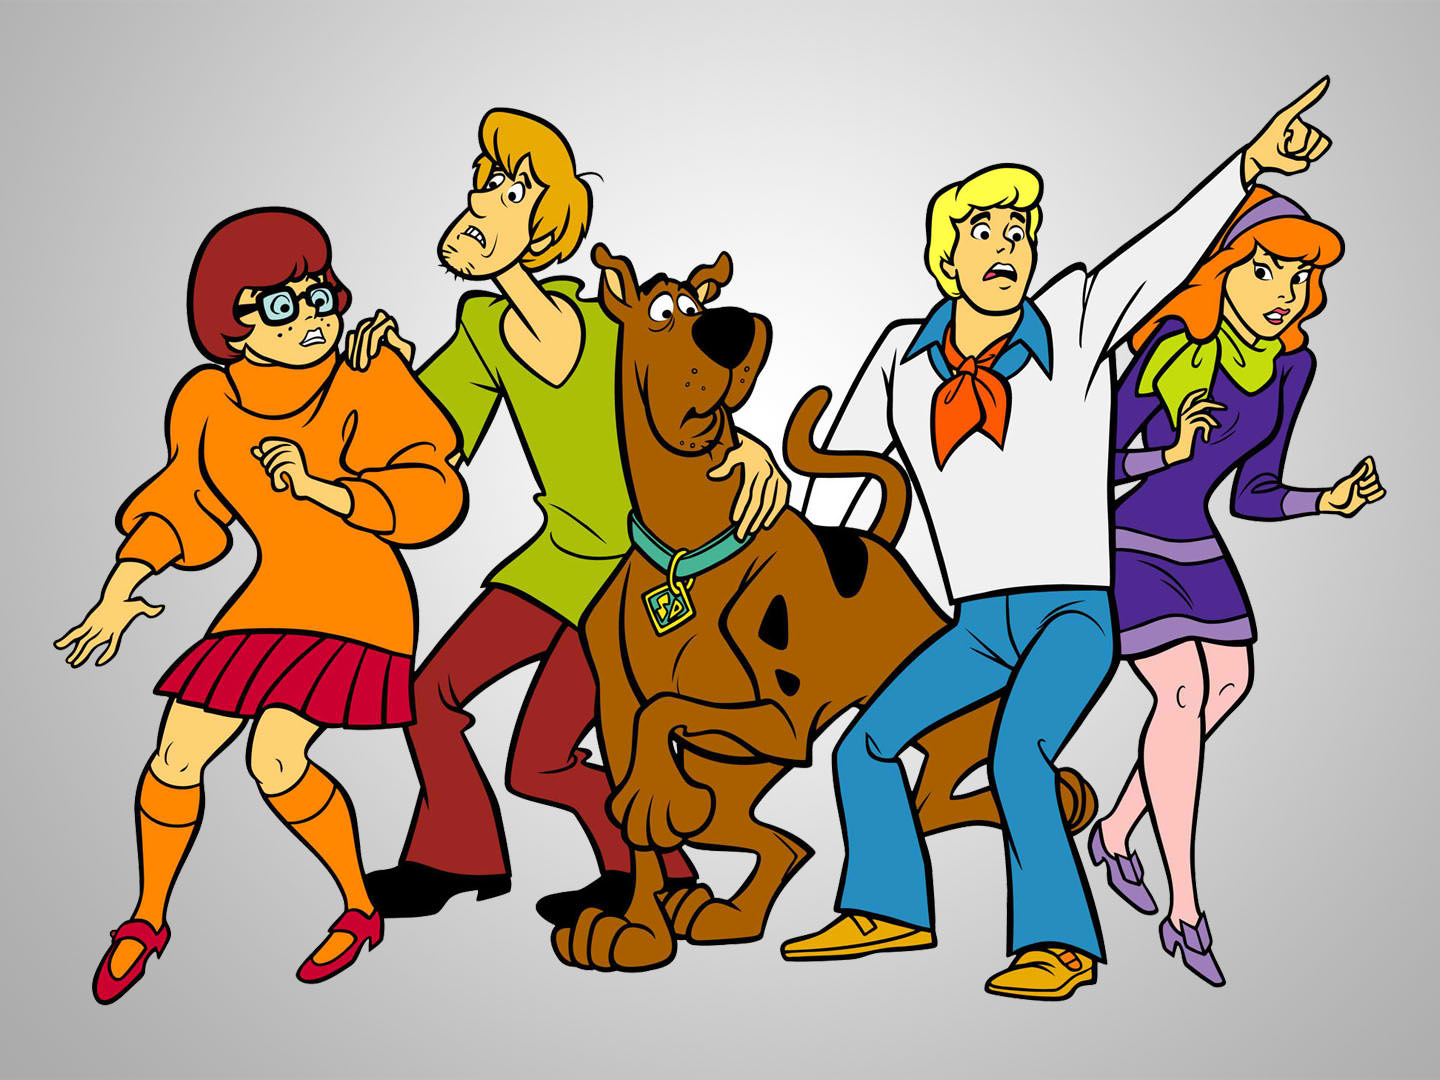 Scooby-Doo and the Gang Return to the Big Screen in New Animated Feature